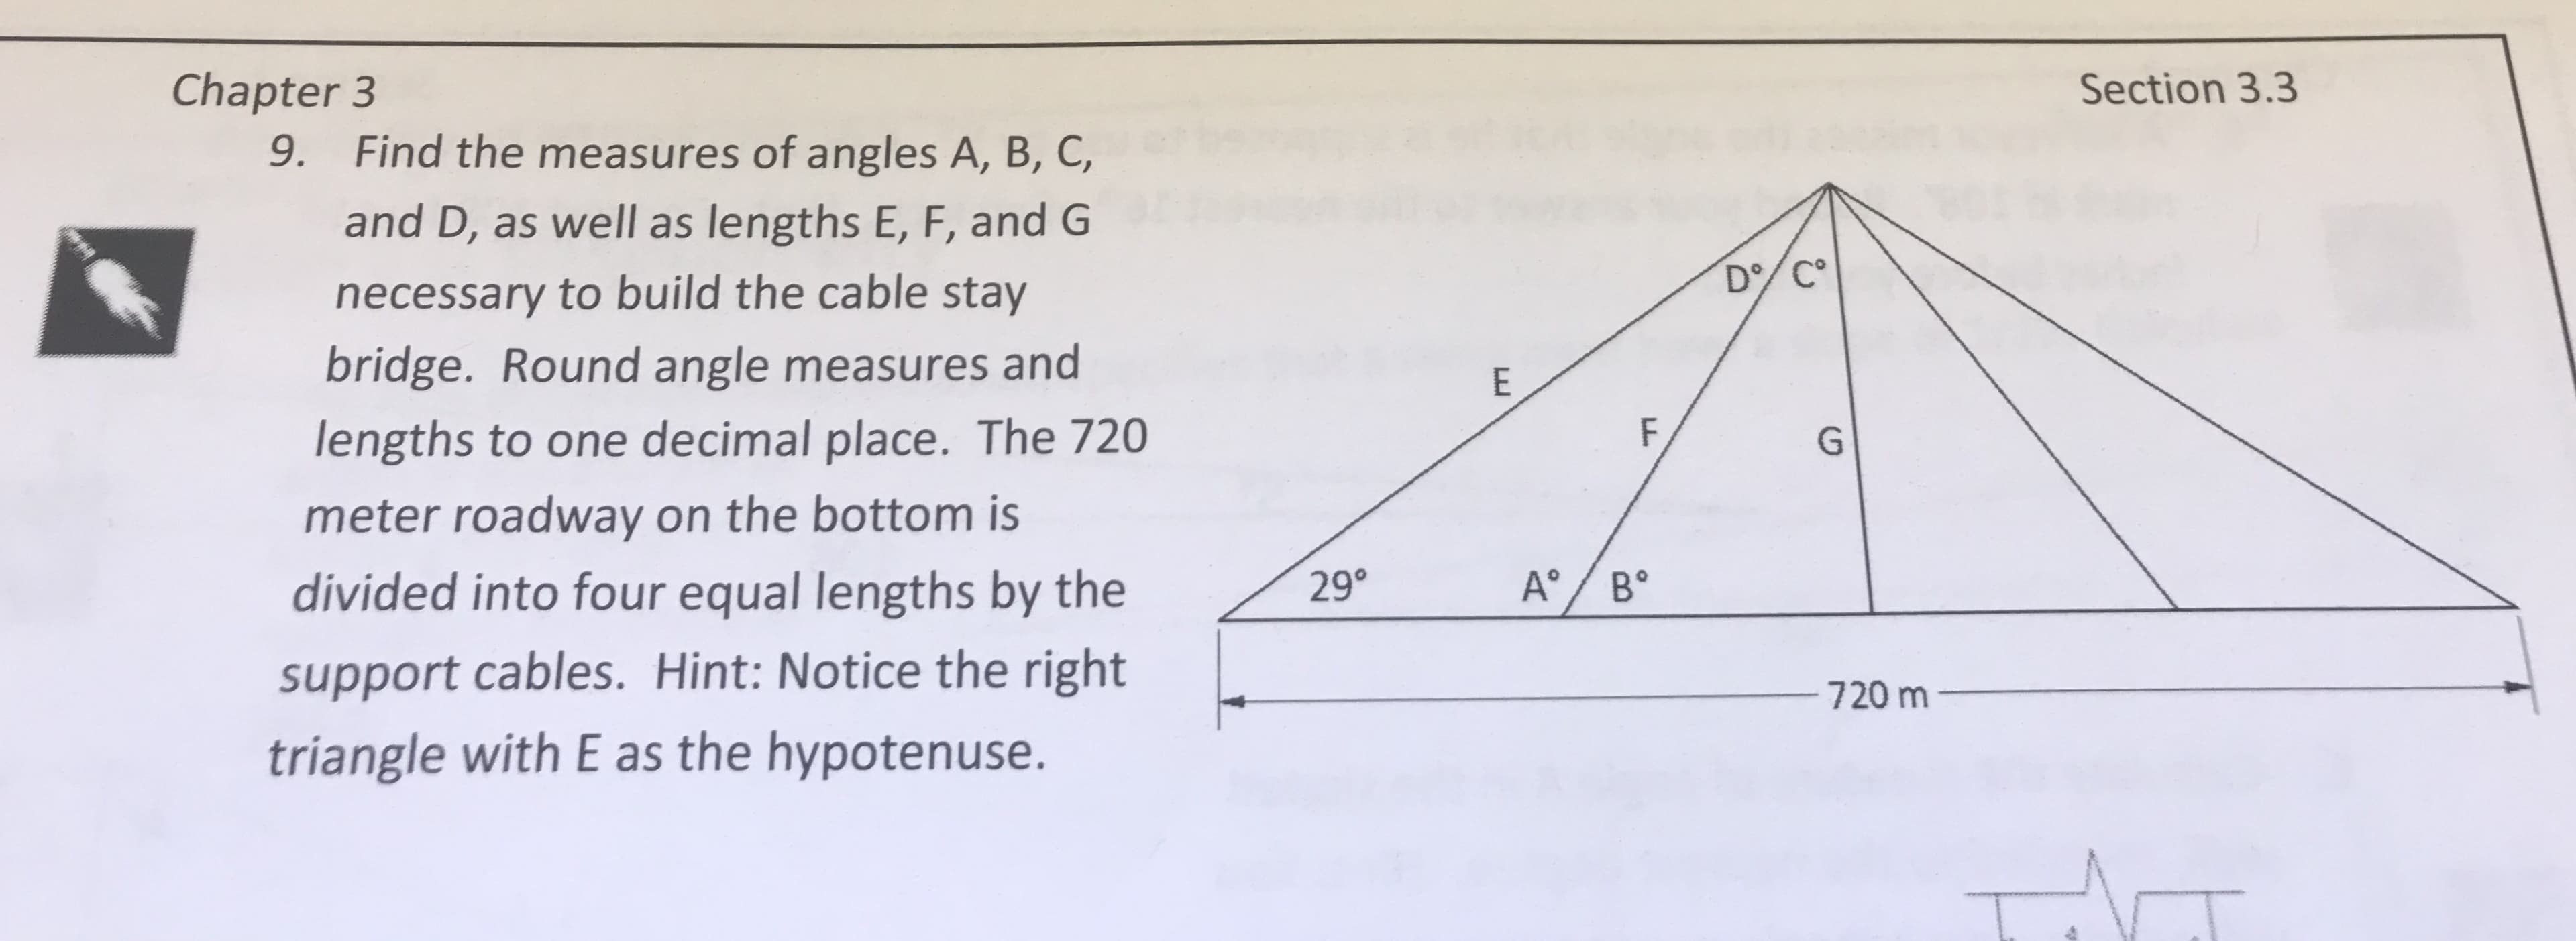 Chapter 3
9.
Section 3.3
Find the measures of angles A, B, C,
and D, as well as lengths E, F, and G
necessary to build the cable stay
bridge. Round angle measures and
lengths to one decimal place. The 720
meter roadway on the bottom is
</29"
A°/s
|
\
divided into four equal lengths by the
support cables. Hint: Notice the right
A"IB"
720 m
triangle with E as the hypotenuse.
